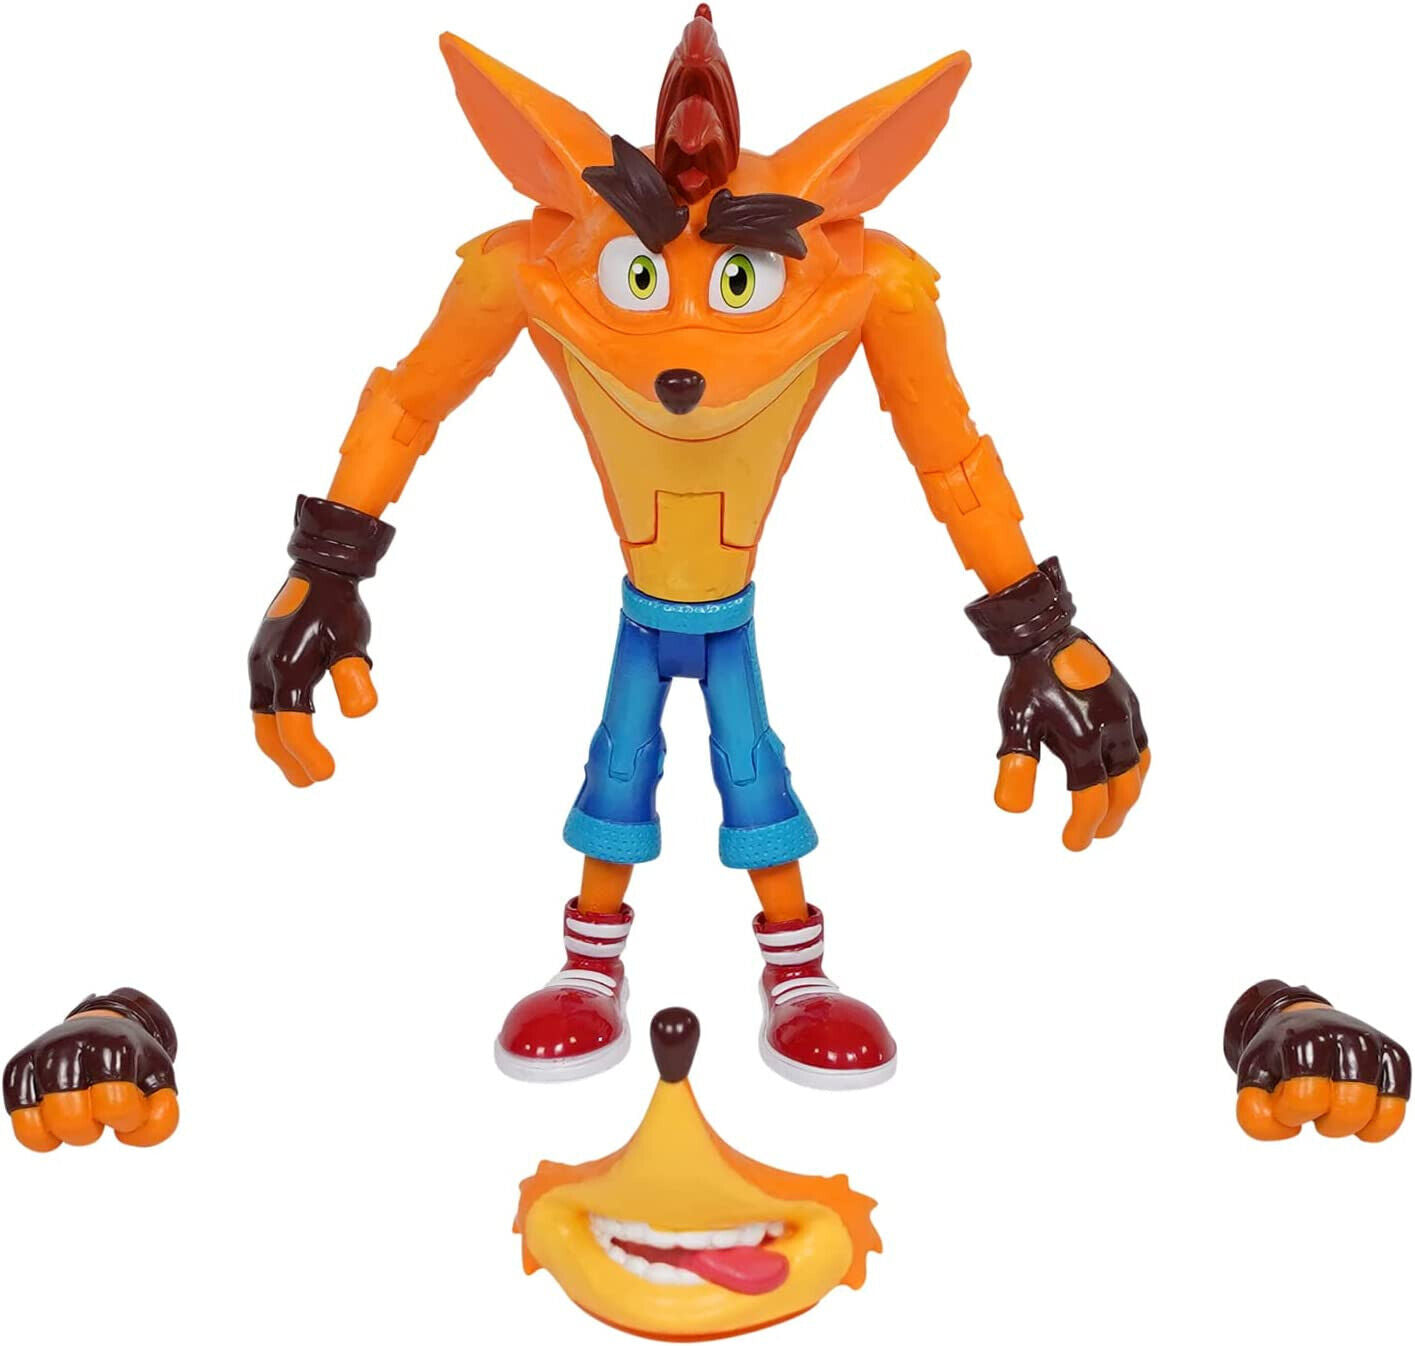 New Crash Bandicoot Deluxe Figure - Articulated & Ready to Play!